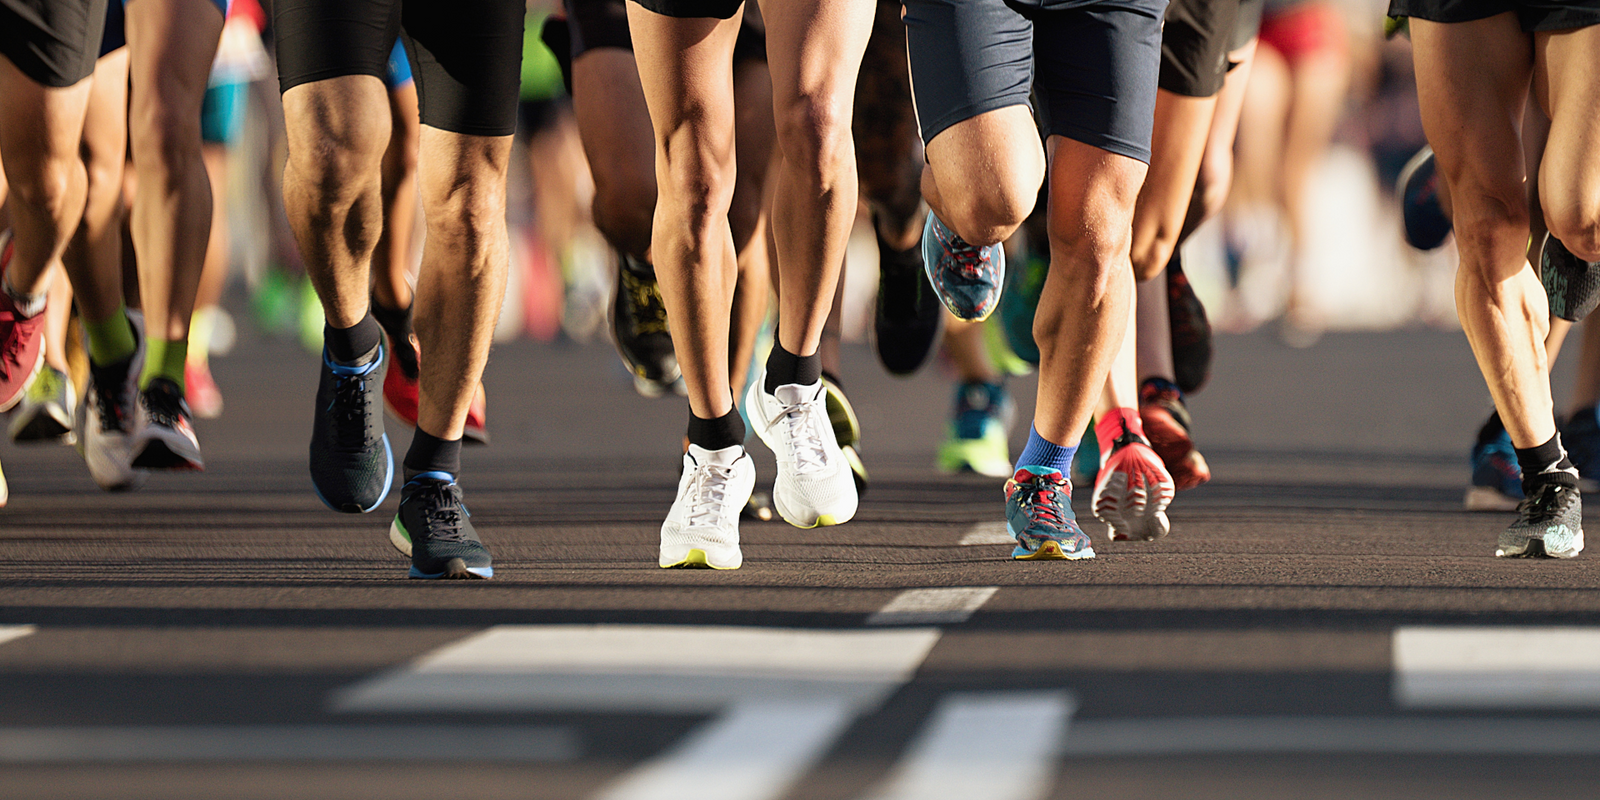 10 Essential Marathon Training Tips For First-Time Runners